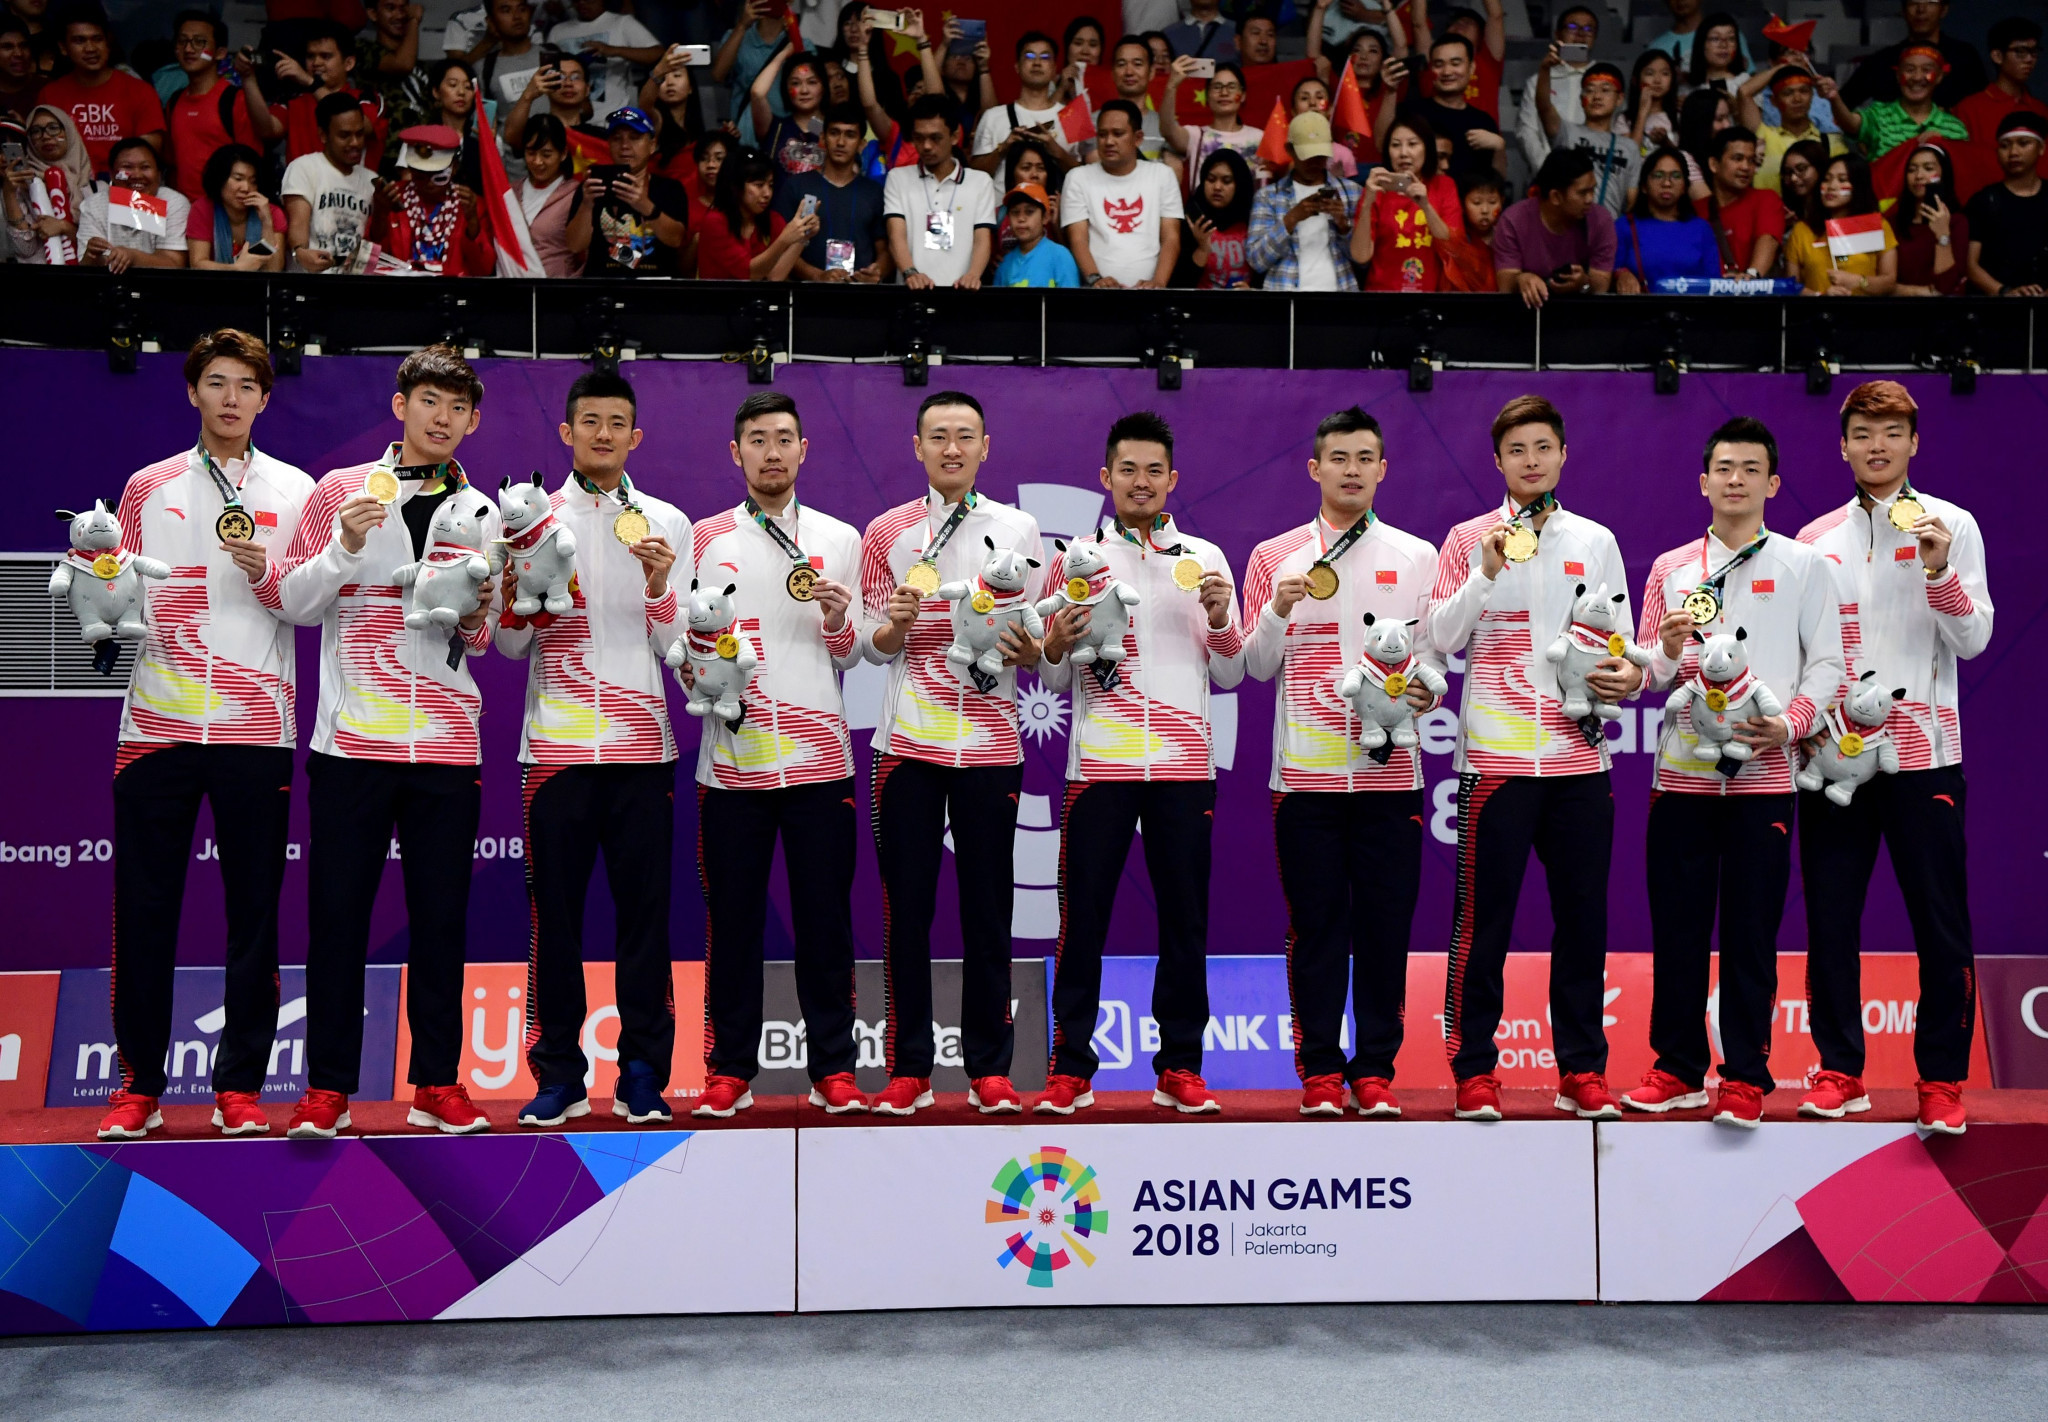 China beat hosts Indonesia in hard-fought men's team badminton final at 2018 Asian Games